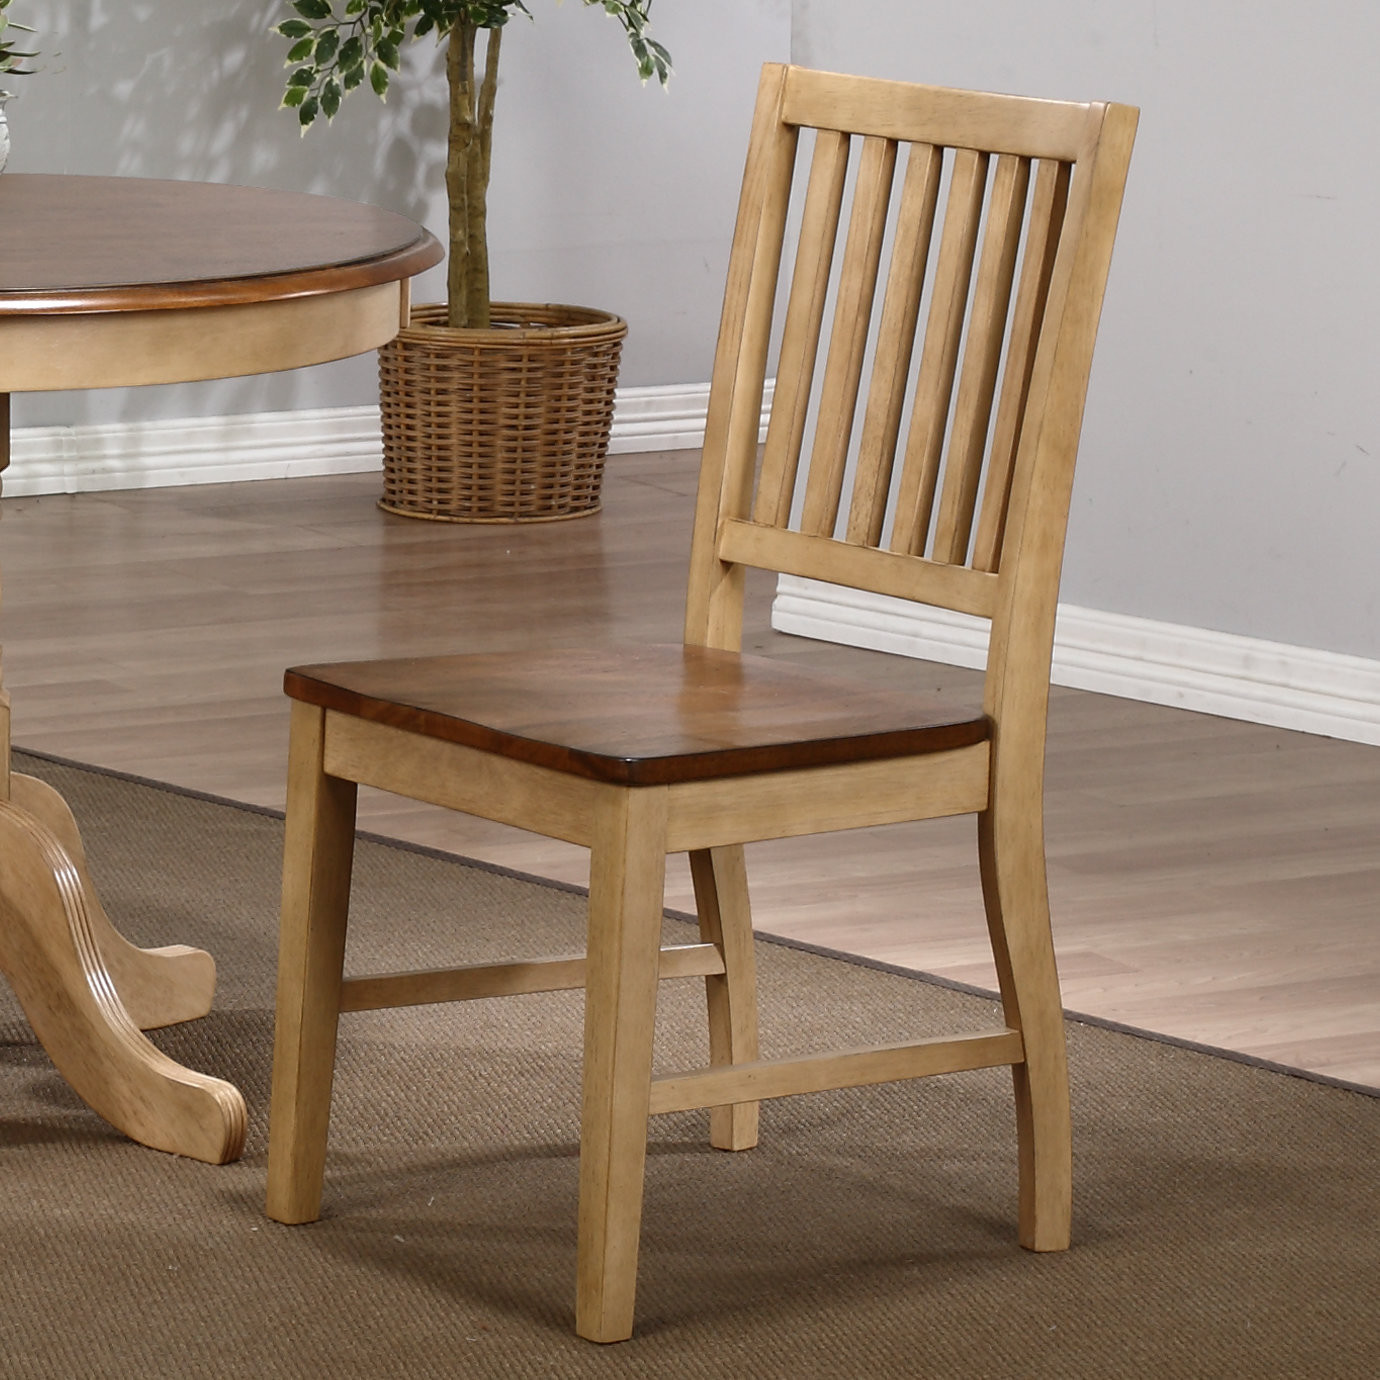 22 Great Hardwood Floor Repair Buffalo Ny 2024 free download hardwood floor repair buffalo ny of loon peak huerfano valley solid wood dining chair reviews wayfair throughout huerfano valley solid wood dining chair